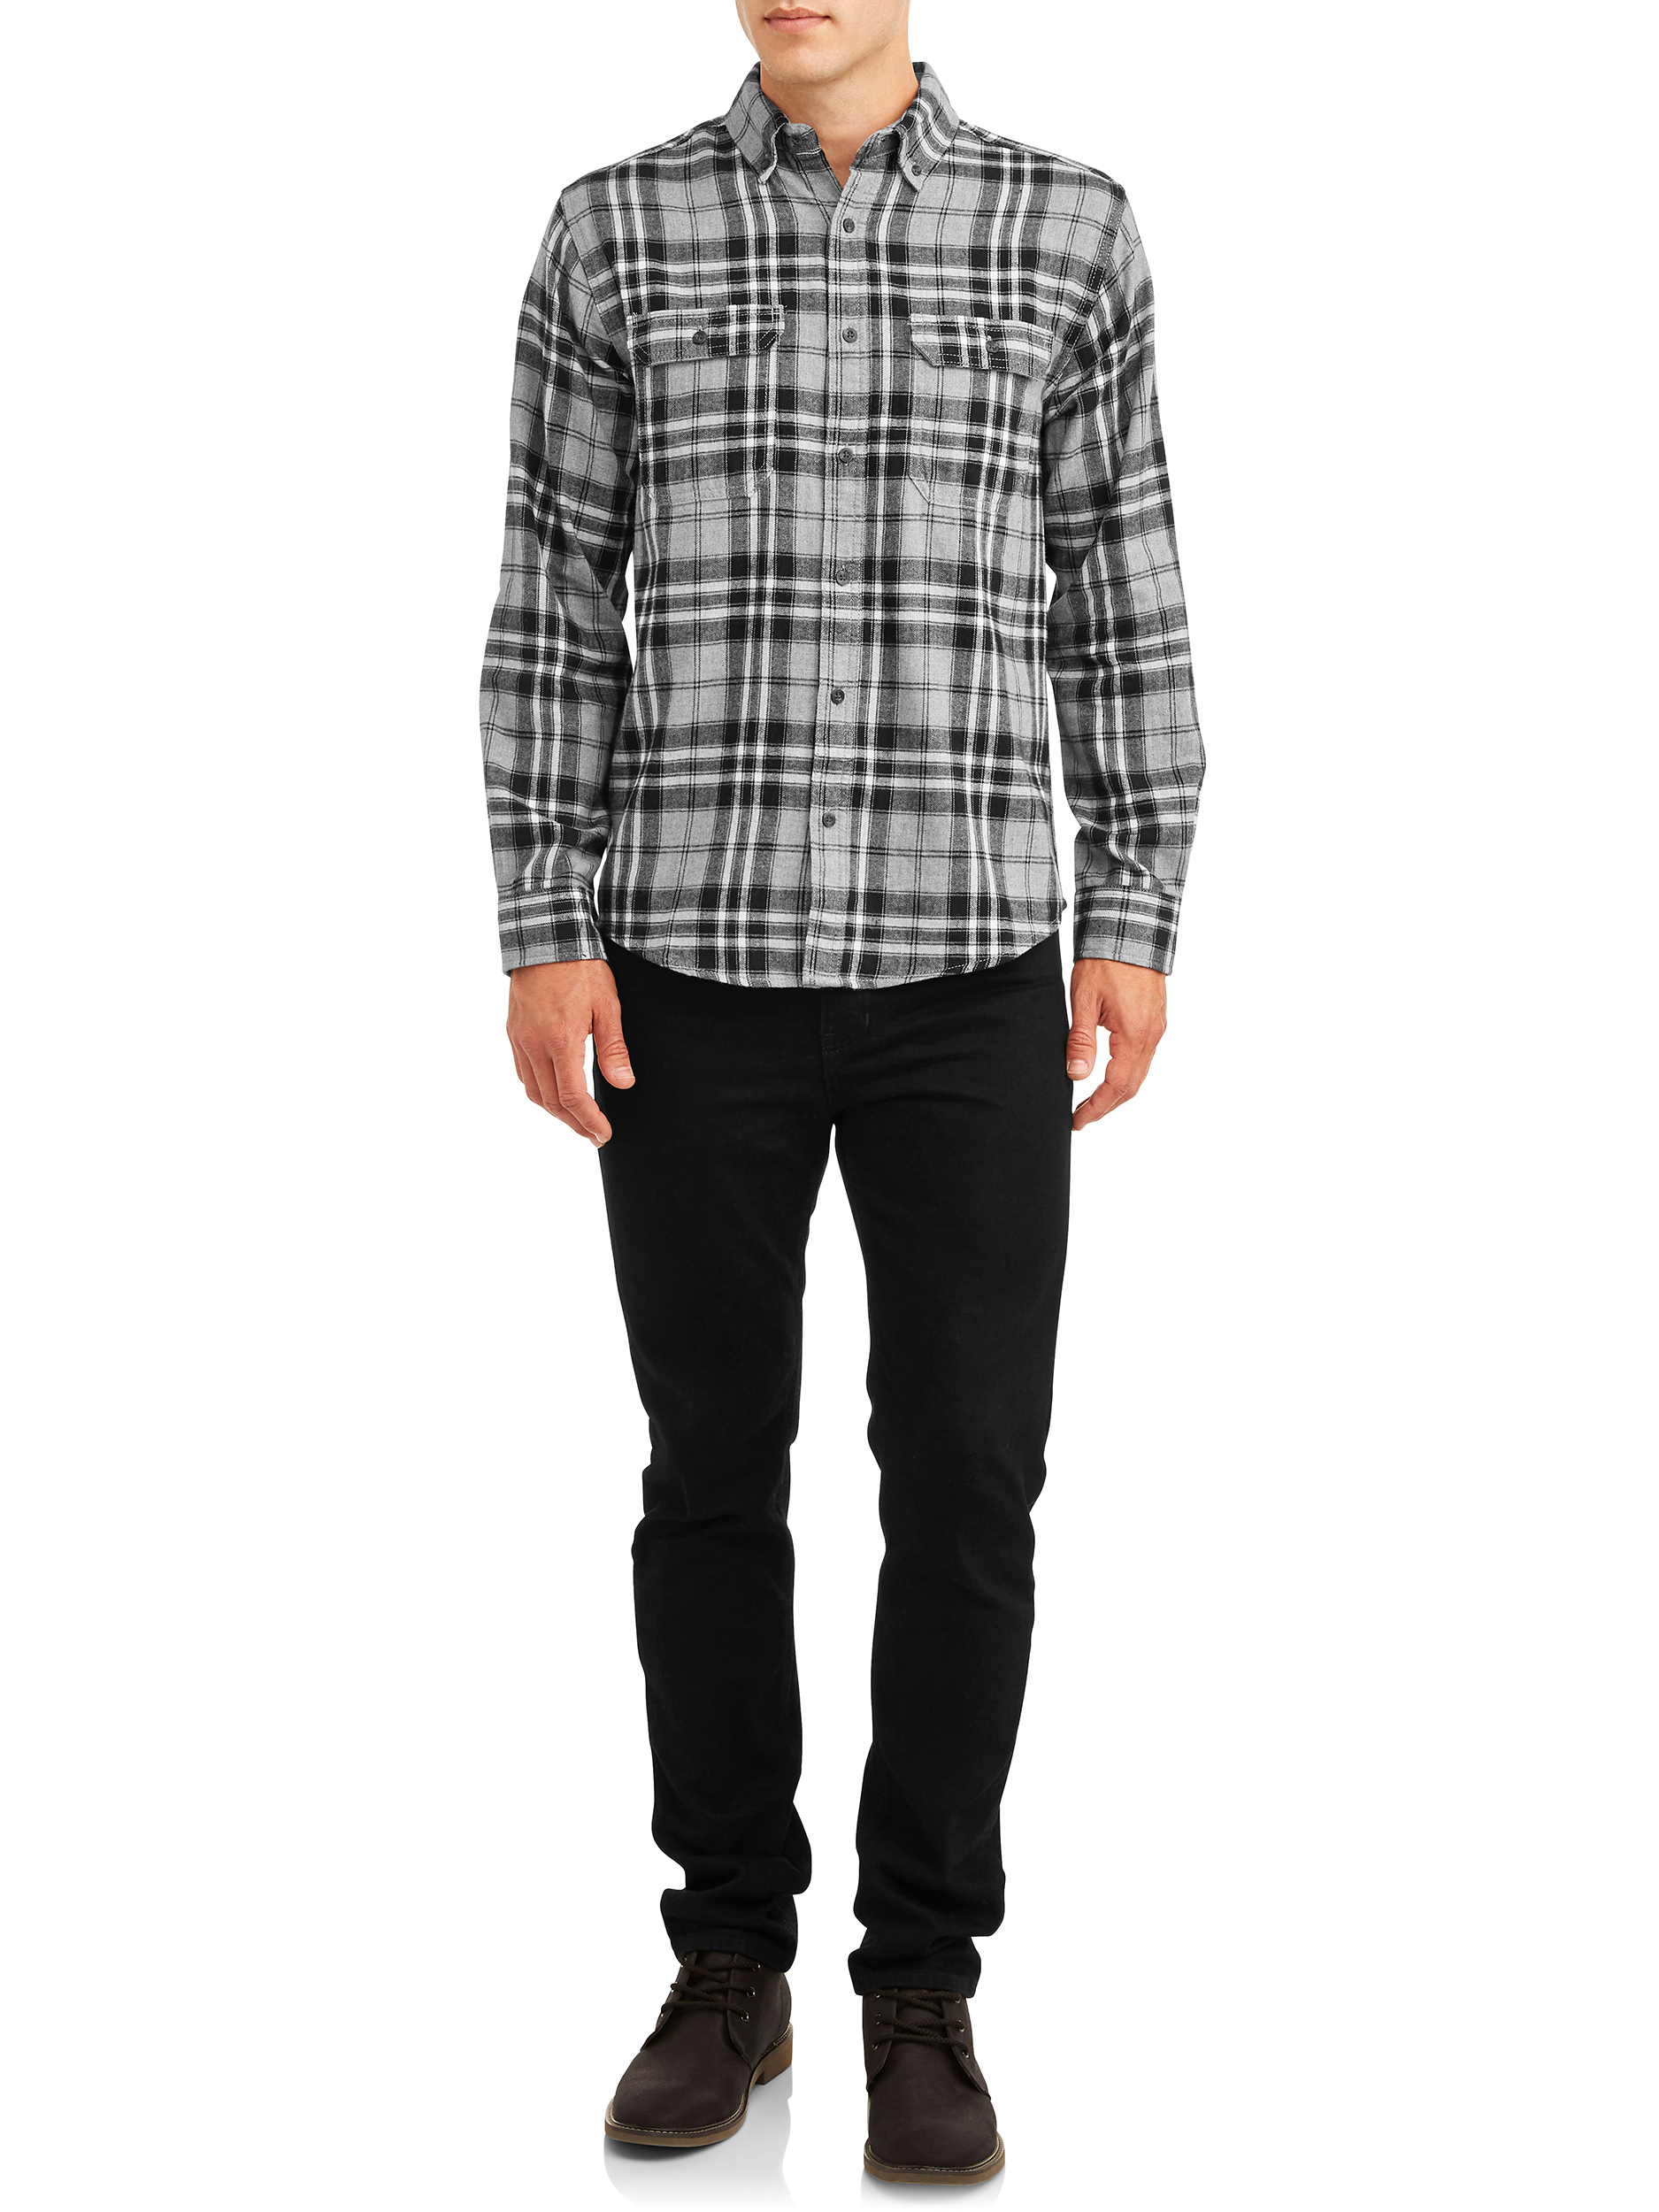 George Men's and Big Men's Long Sleeve Super Soft Flannel Shirt, up to size 3XLT - image 2 of 4